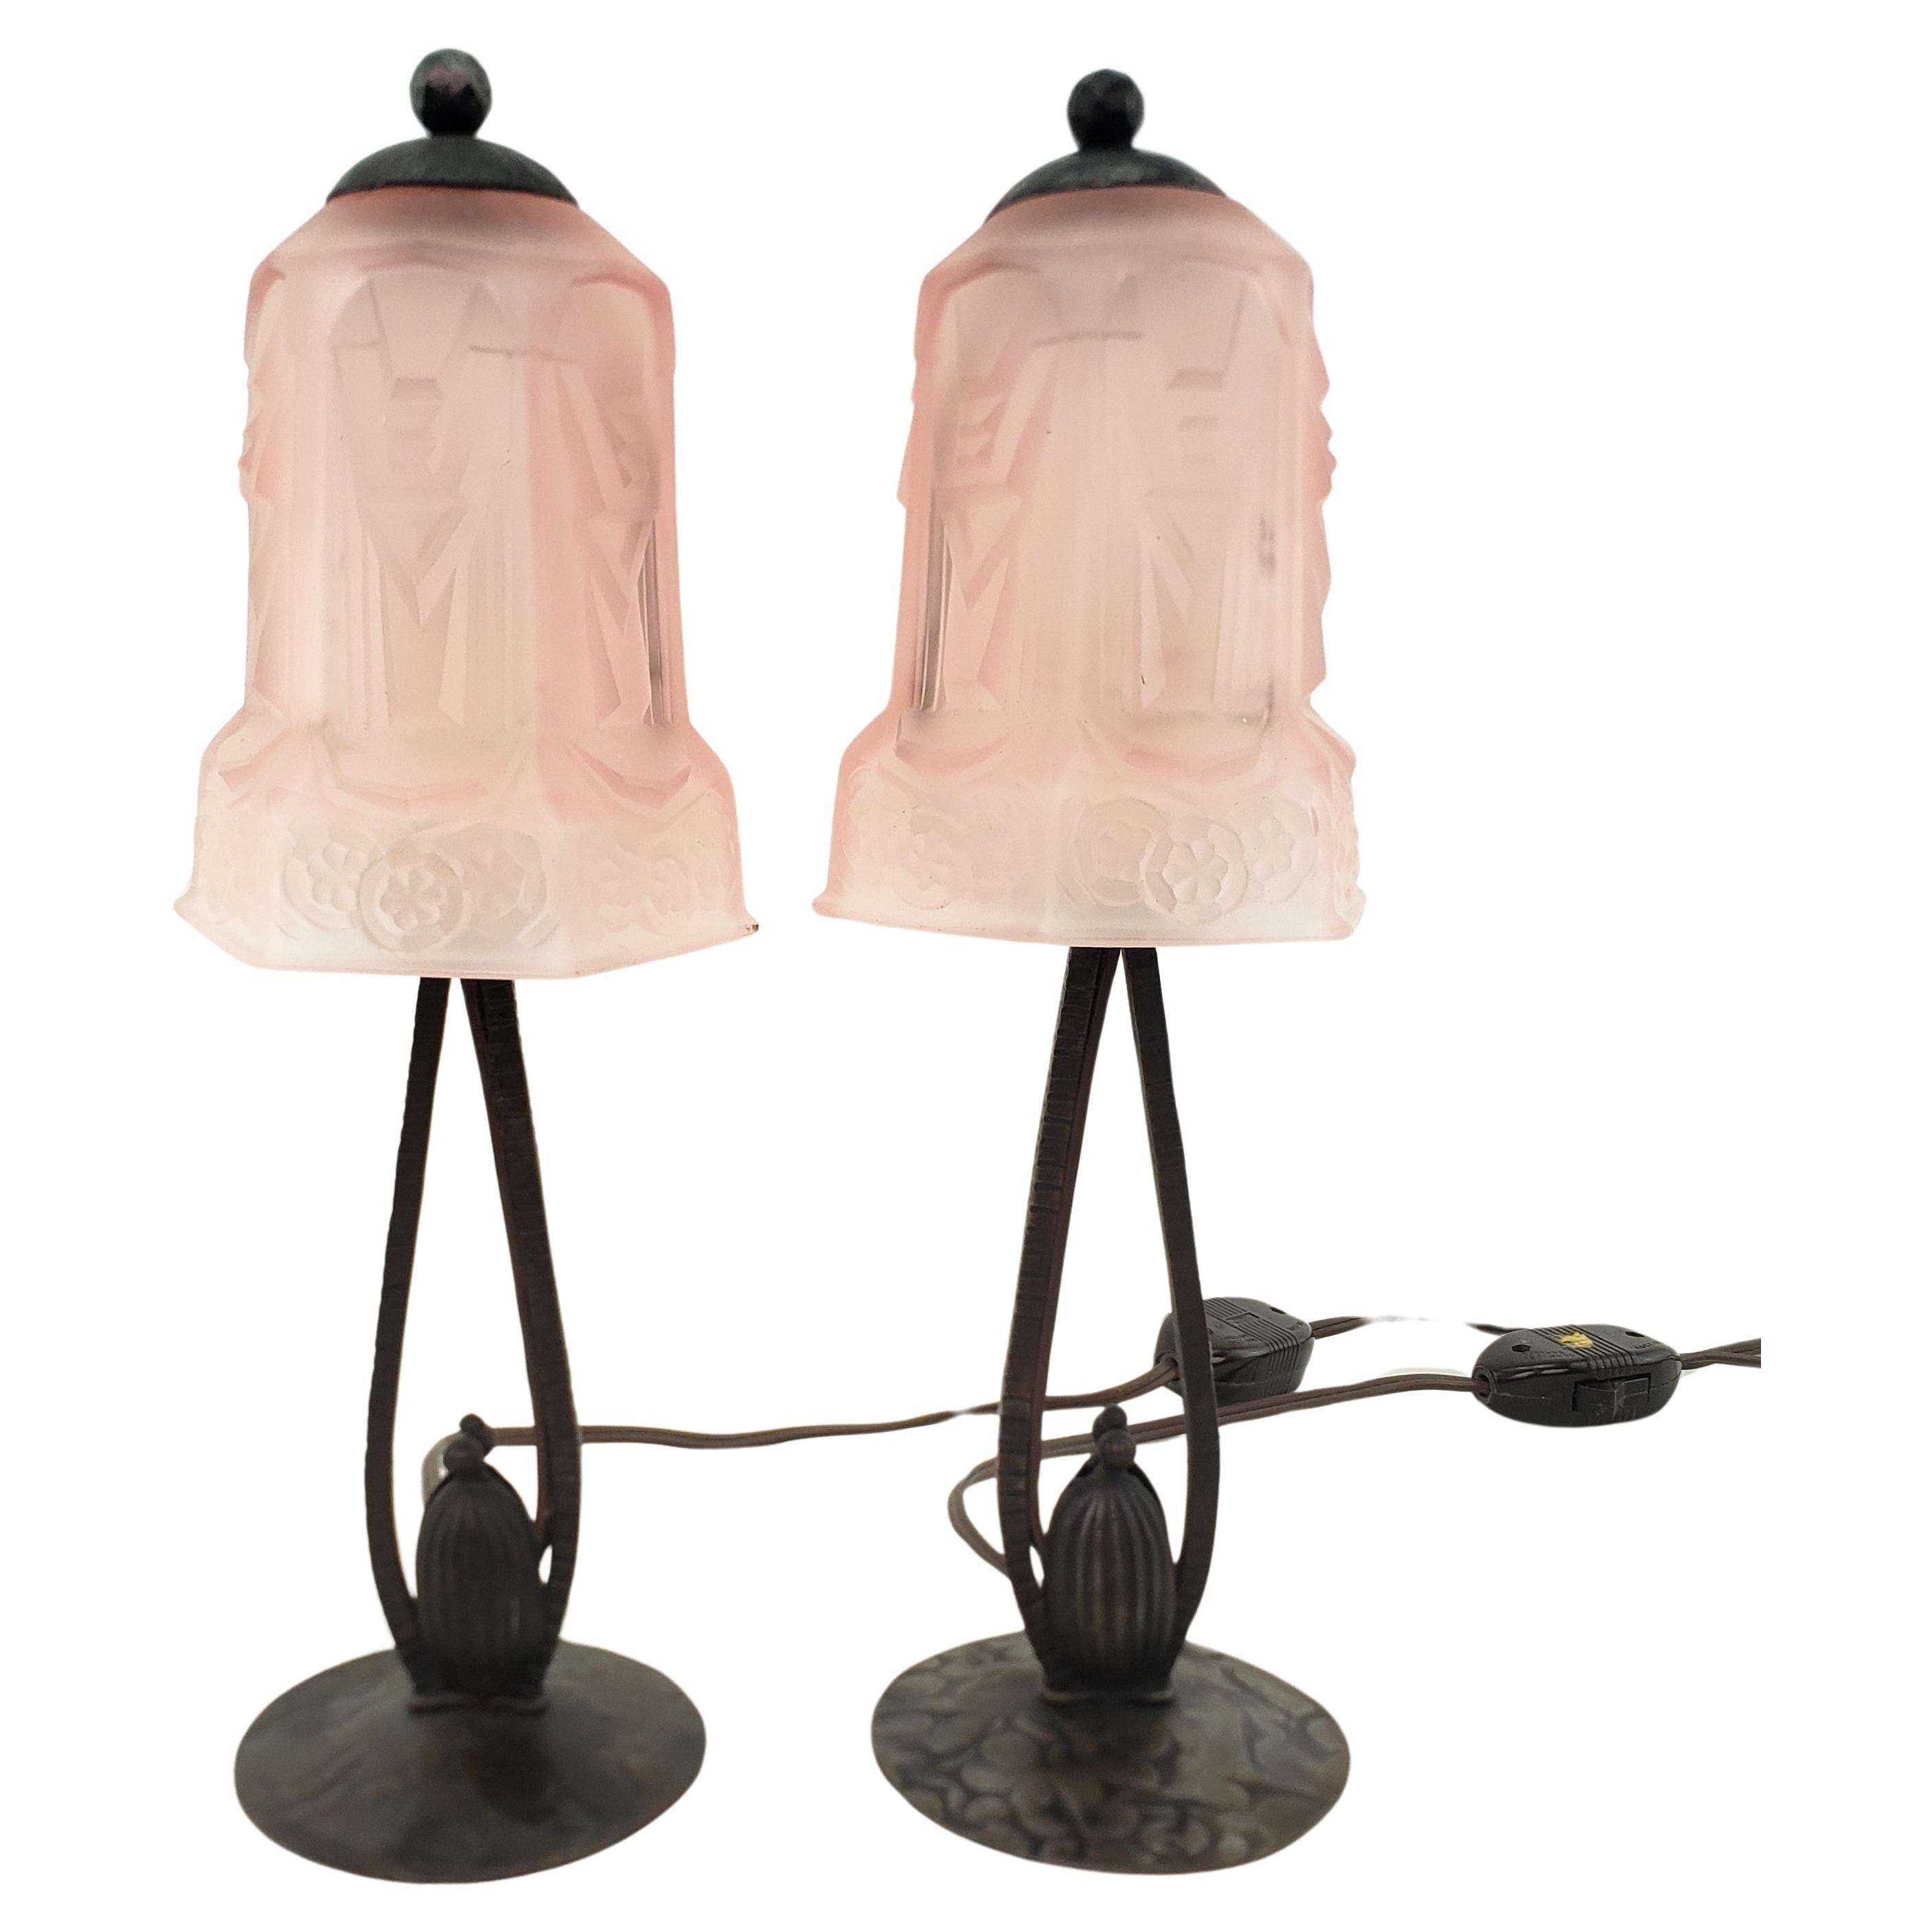 Pair of Antique Art Deco Bourdoir or Table Lamps with Frosted Pink Glass Shades For Sale